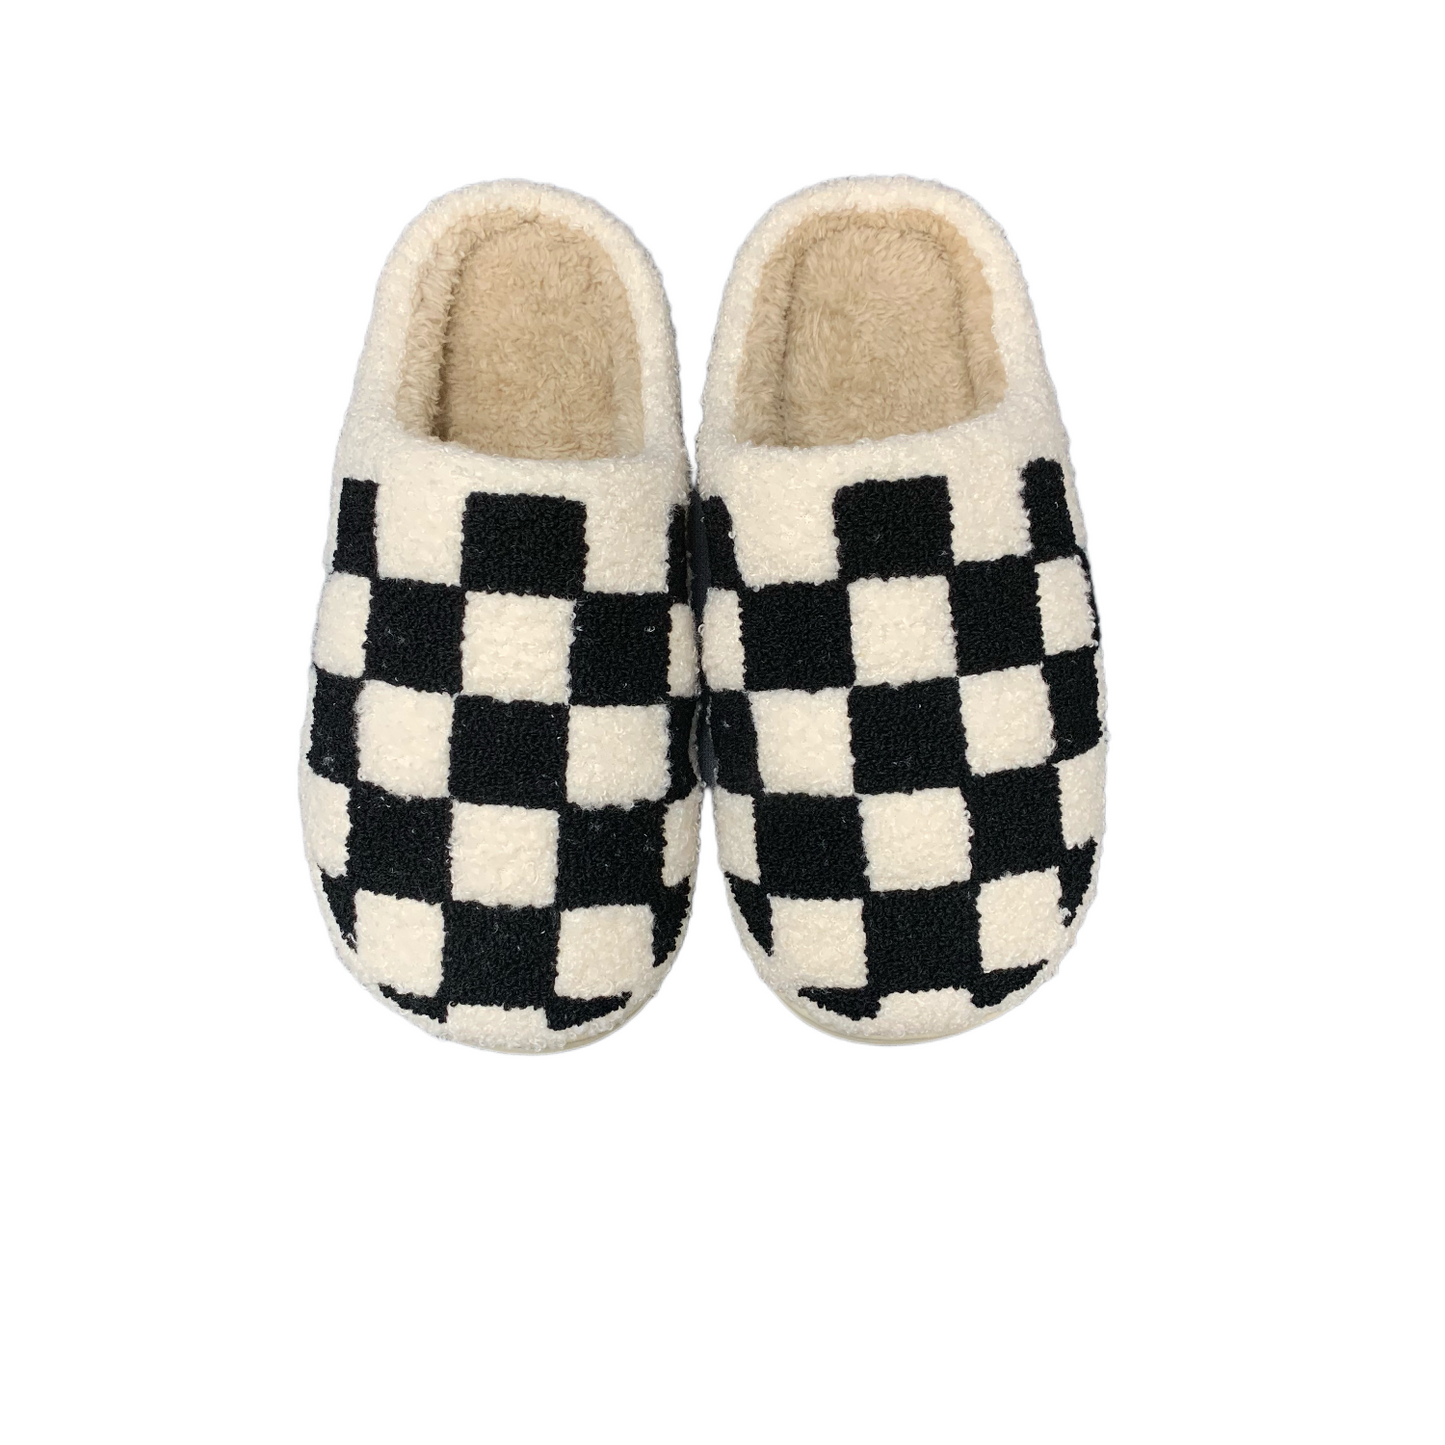 Checkerboard Slippers for Men